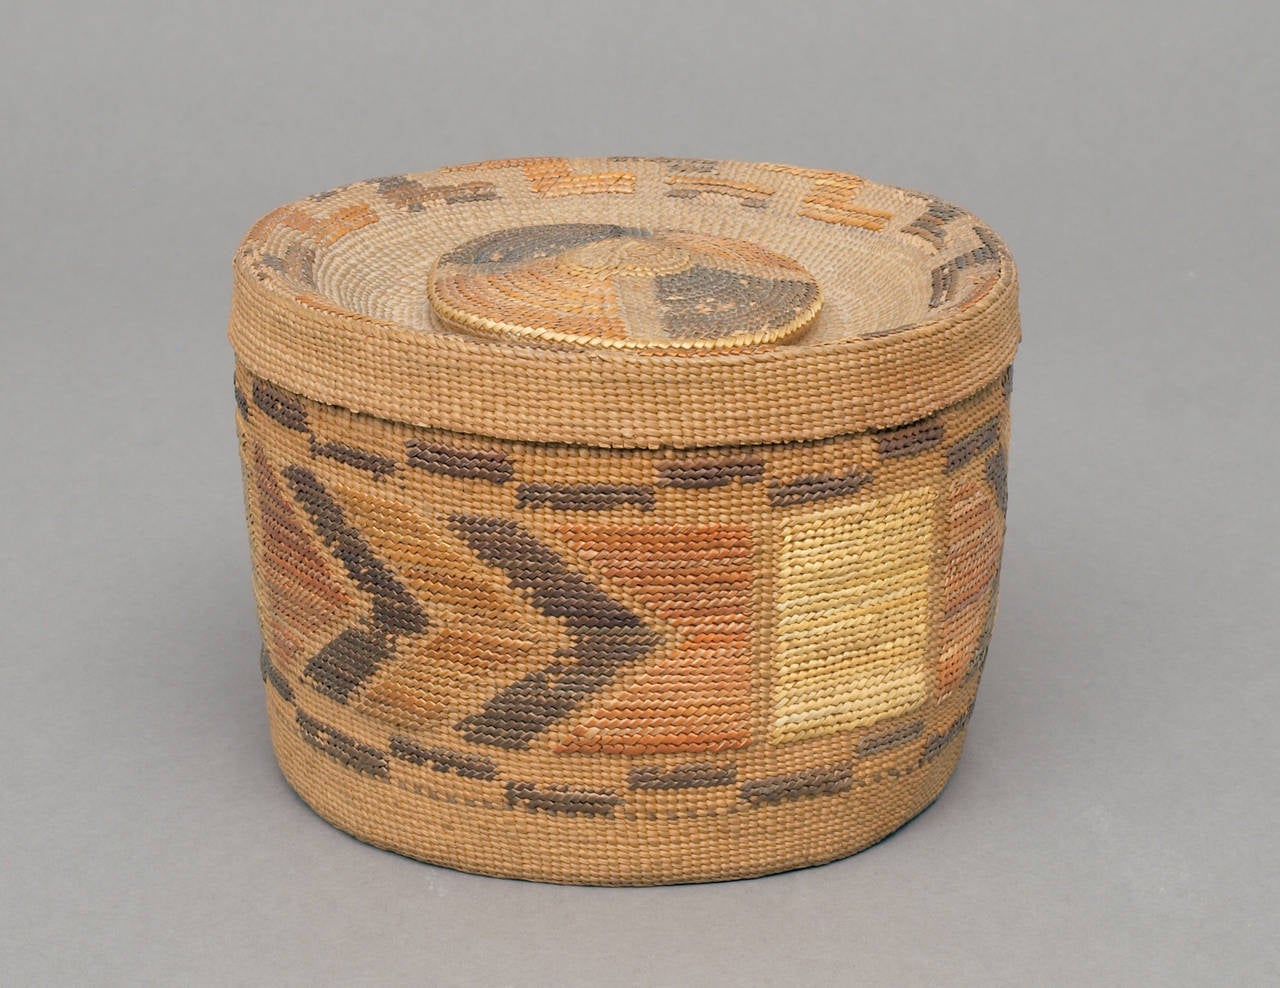 A combination of Spruce Root fibers and native grasses intricately twined by a Tlingit woman around 1920.   Rattle Top baskets such as this were extremely labor-intensive to create and it is estimated that around 300 hours went in to the creation of